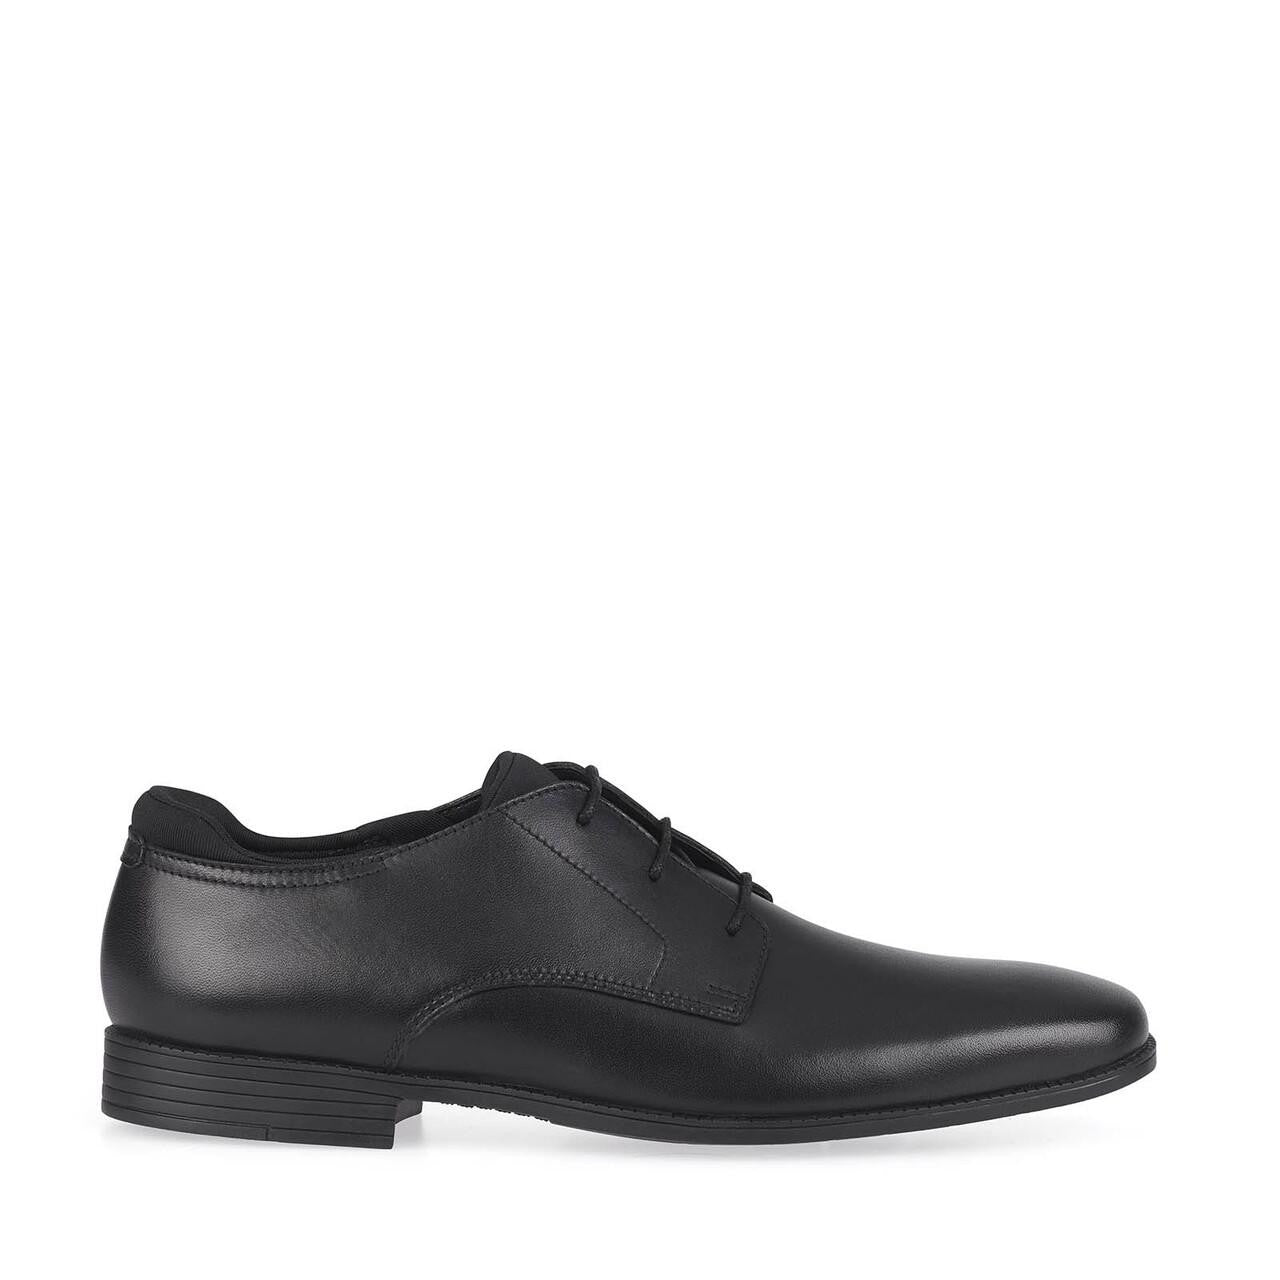 A boys smart school shoe by Start Rite, style Academy, in black leather with lace up fastening. Right side view.